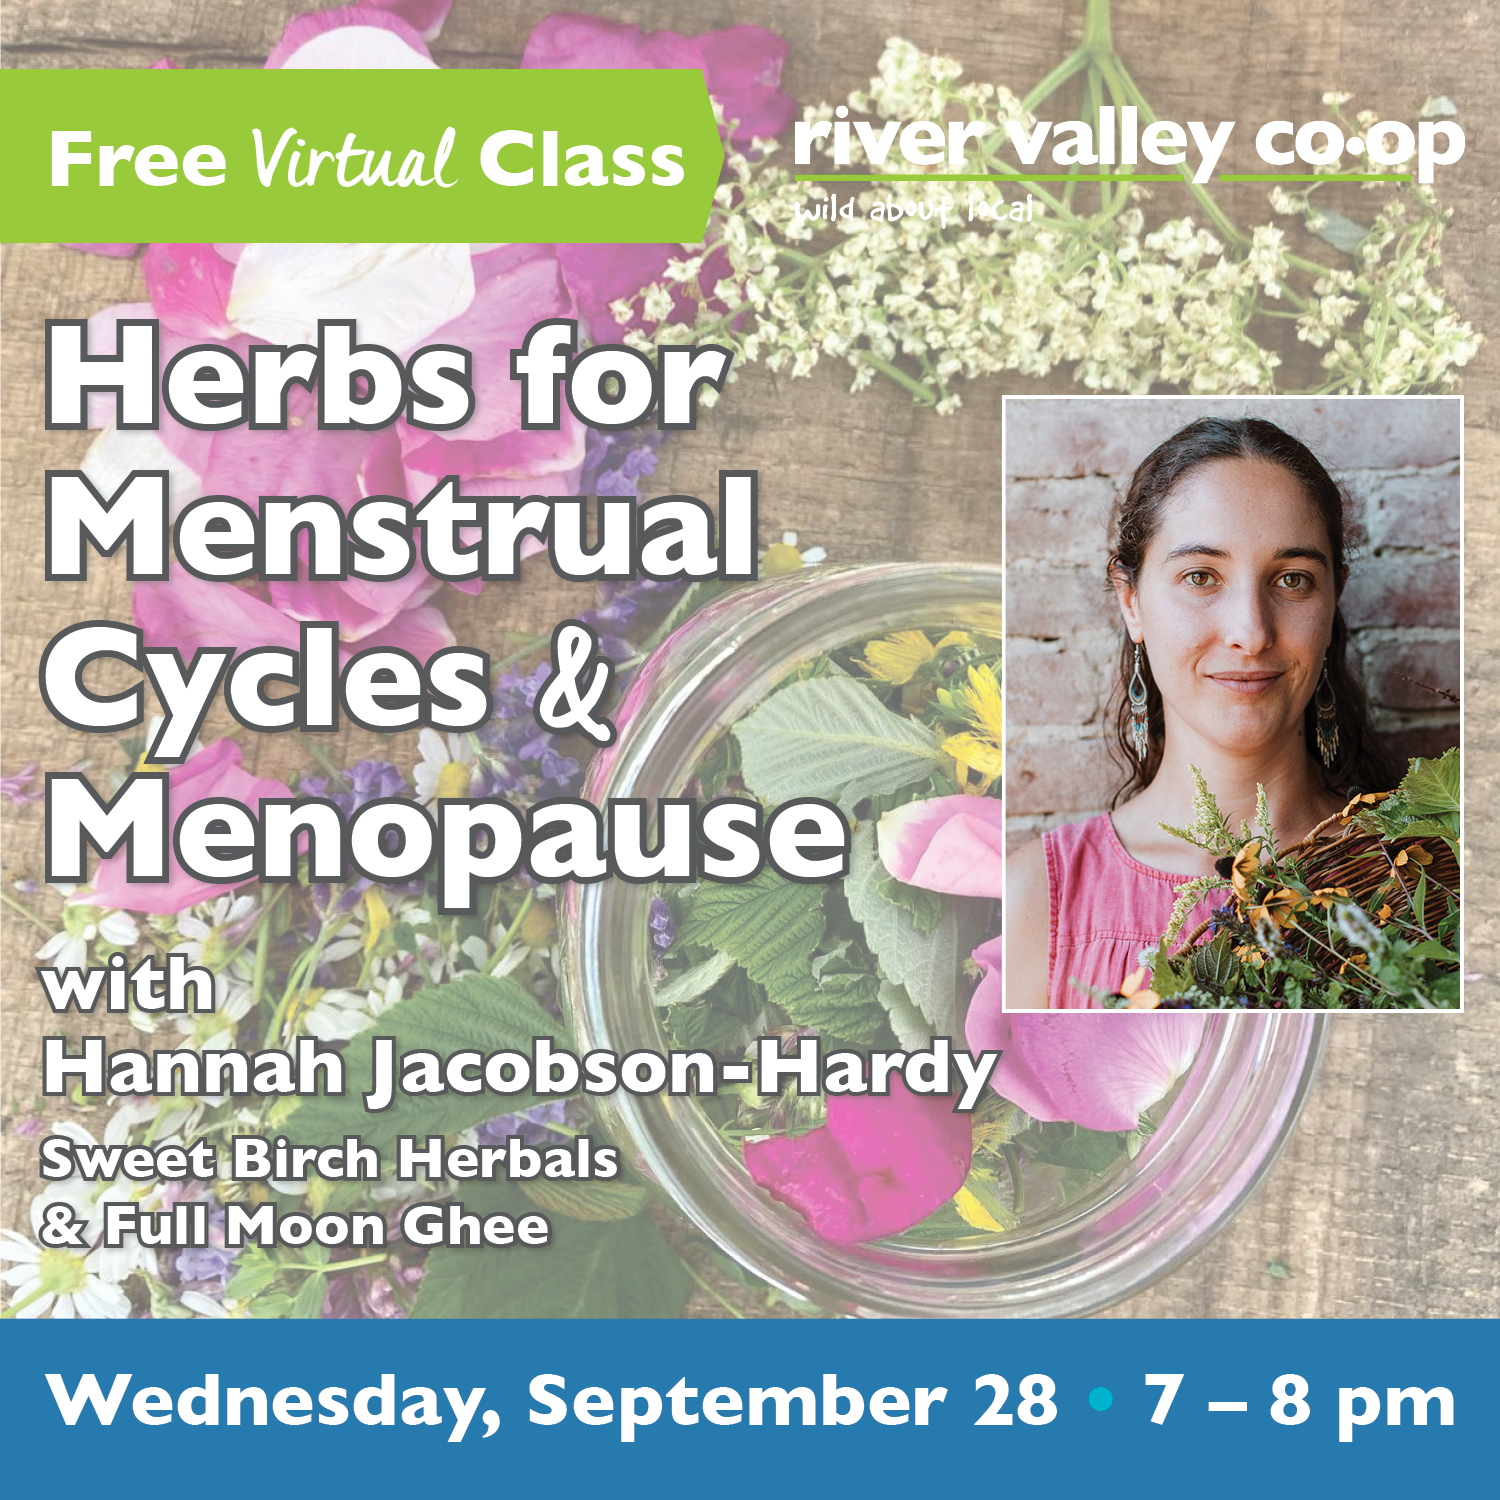 Click to watch our replay of "Herbs for Menstrual Cycles & Menopause"